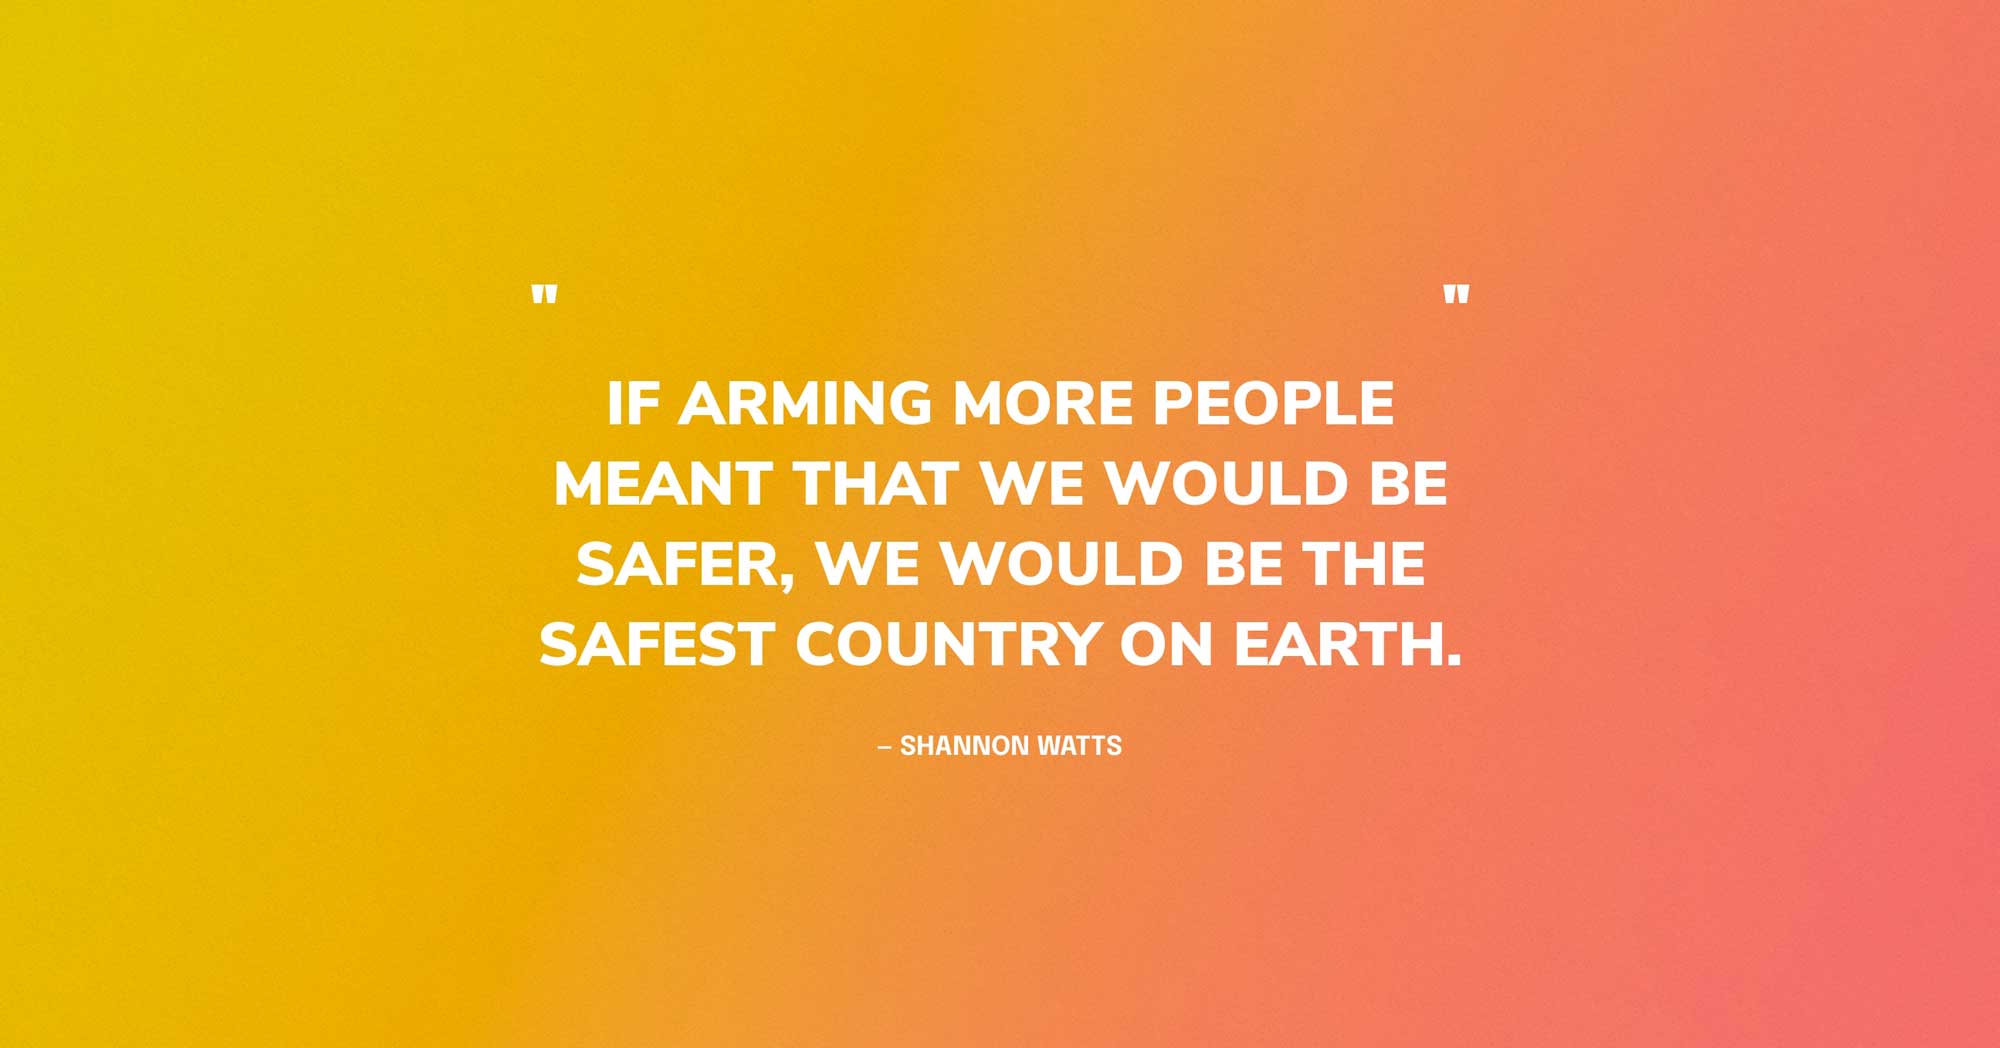 Gun Violence Quote Graphic: If arming more people meant that we would be safer, we would be the safest country on earth. — Shannon Watts